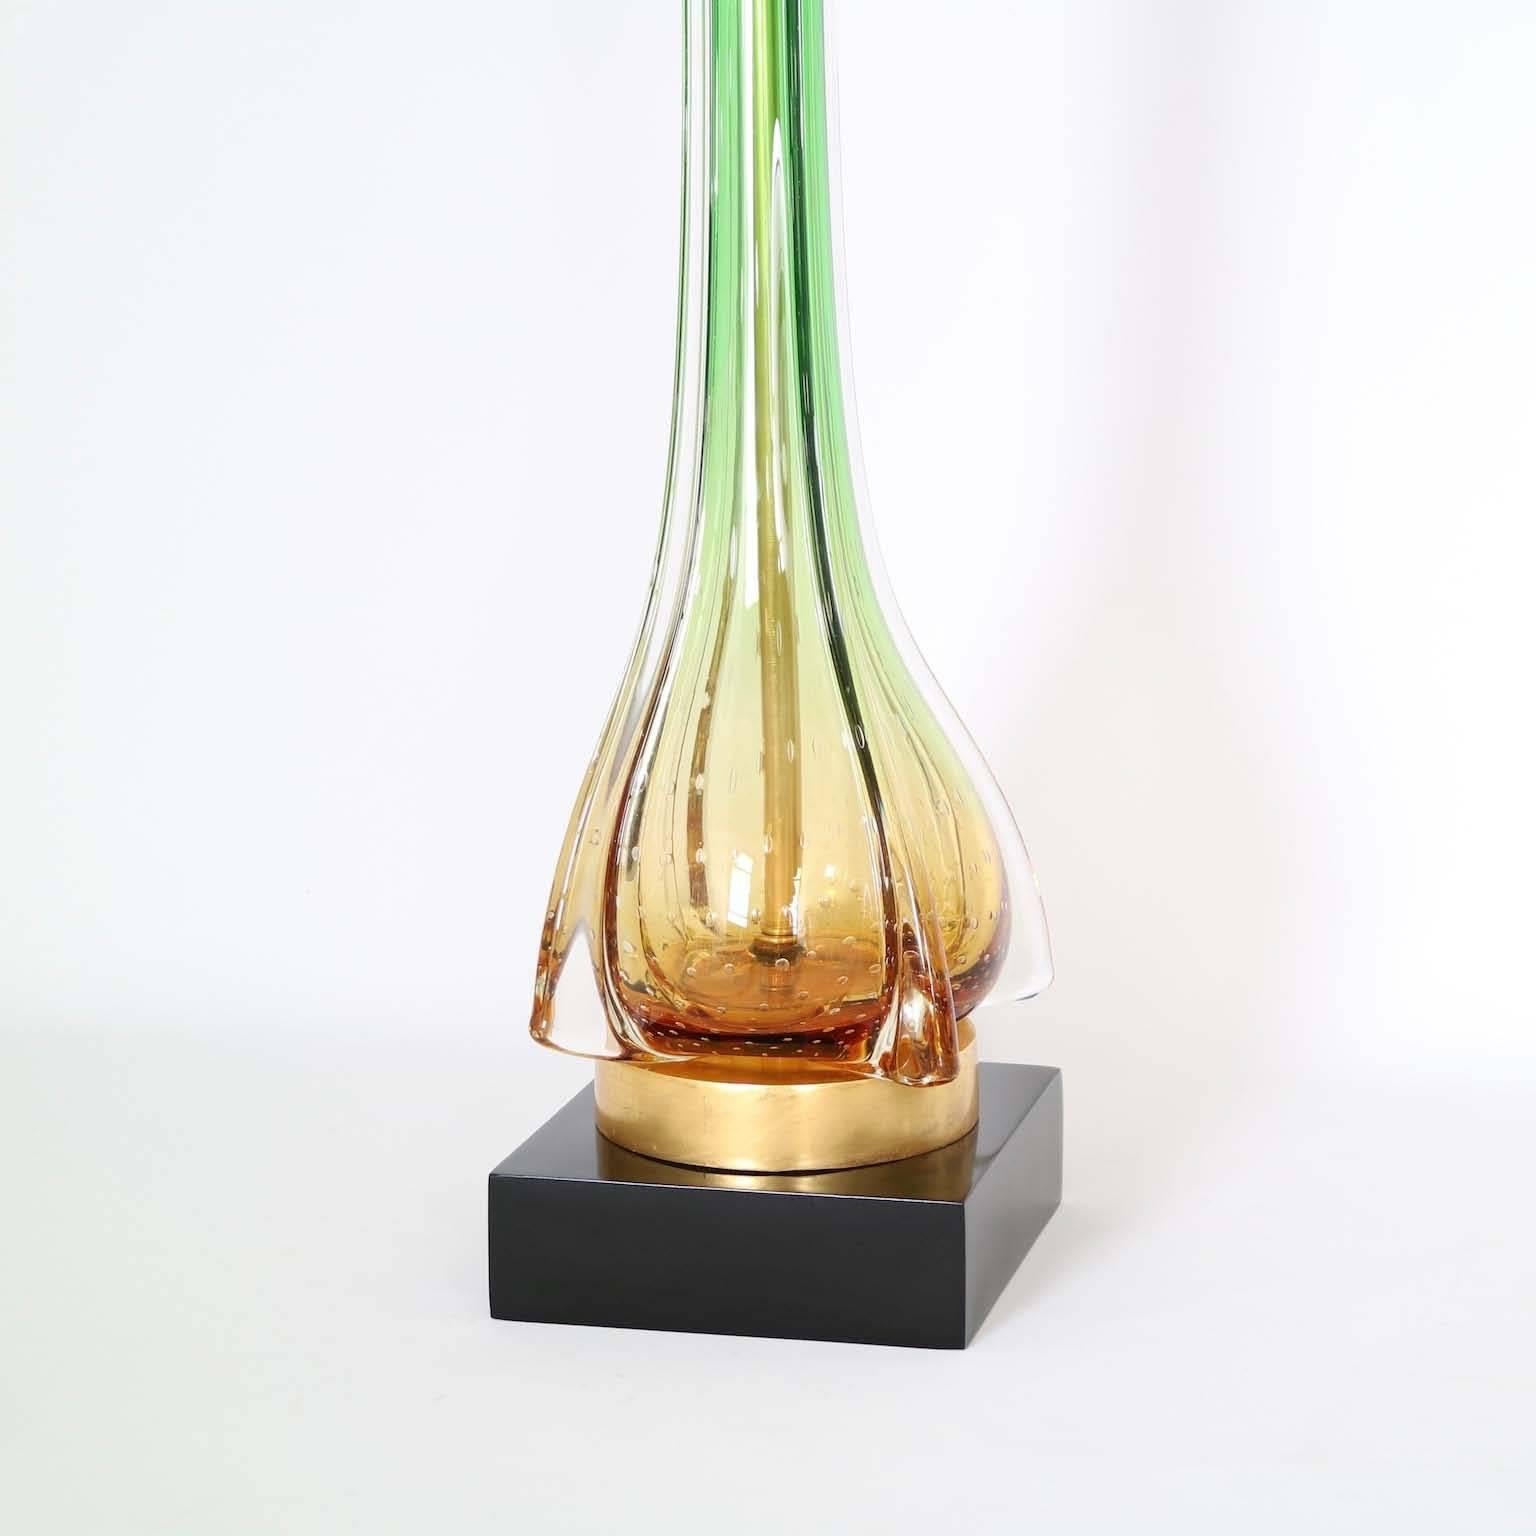 Pair of Mid-Century Modern glass lamps by Seguso in amber-green degrade color, with controlled bubbles at the bottom of the body. Mounted in a new gilded and lacquered wooden bases. The noted height is to the finial. The height to the top of the